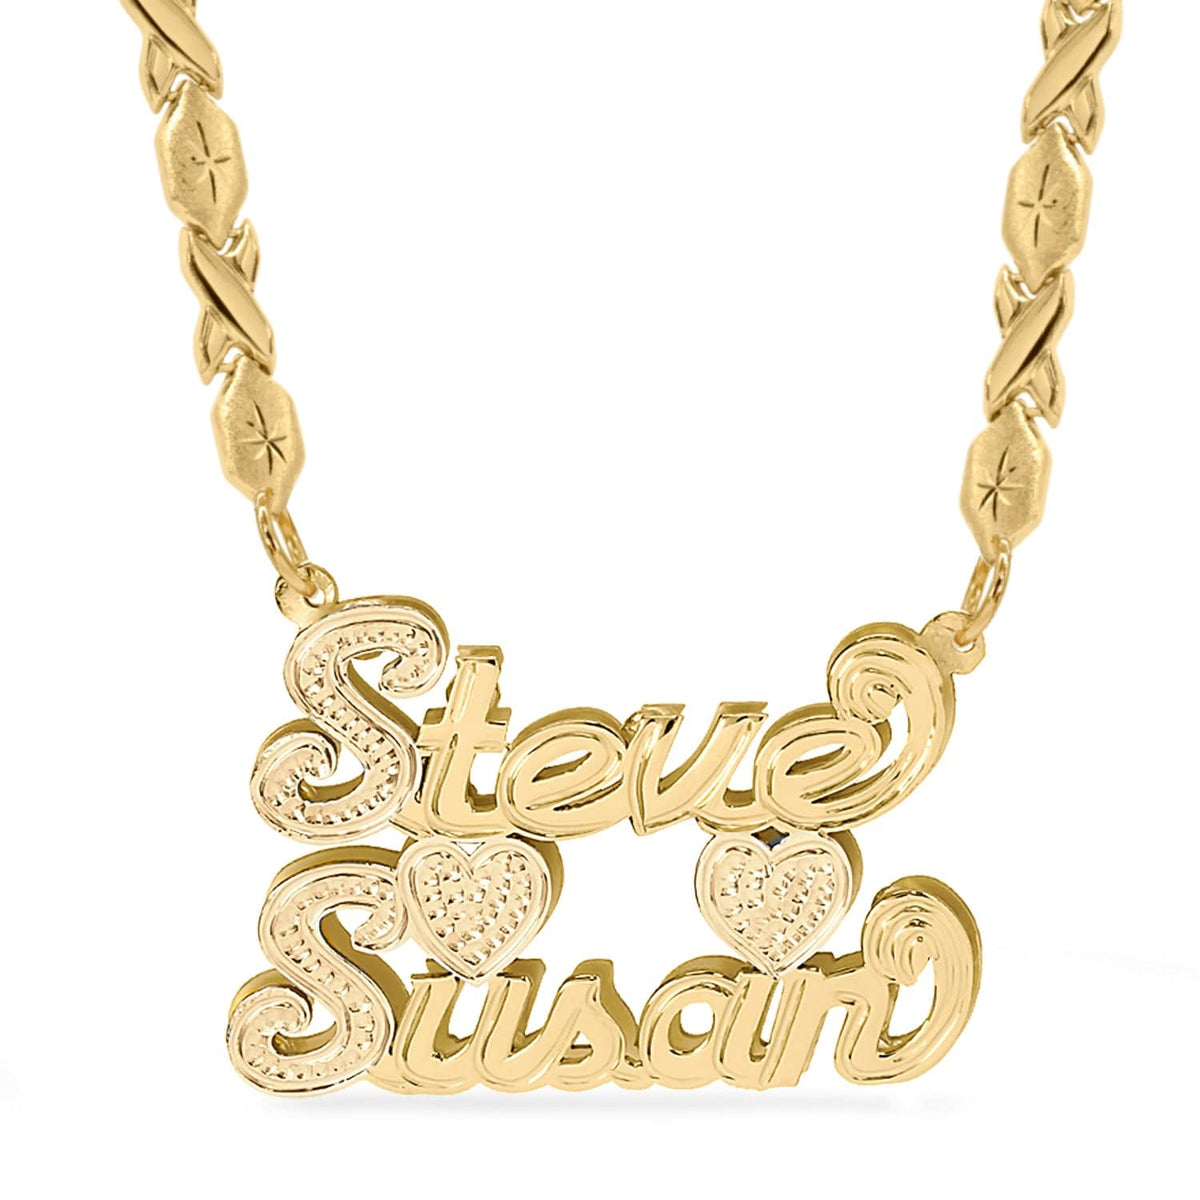 14k Gold over Sterling Silver / Xoxo Chain Double Plated Couples Name Necklace with Xoxo chain